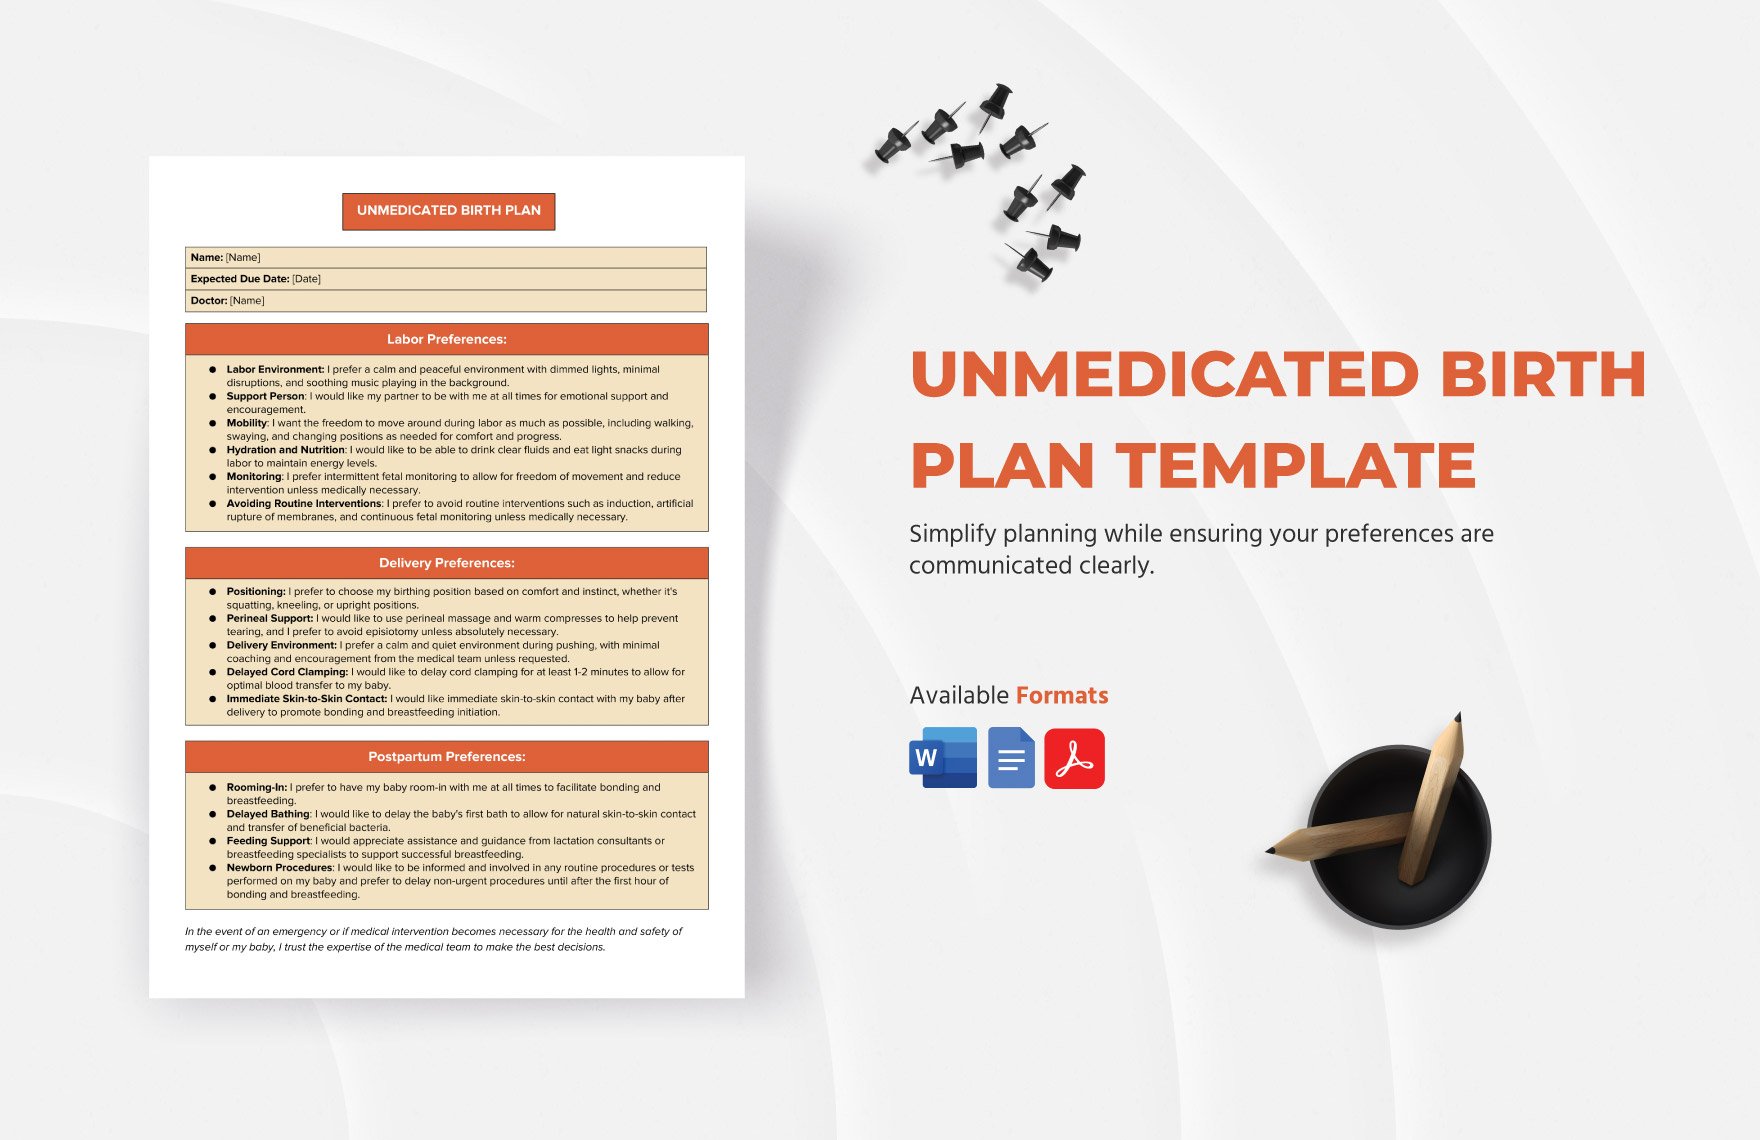 Unmedicated Birth Plan Template in Word, Google Docs, PDF